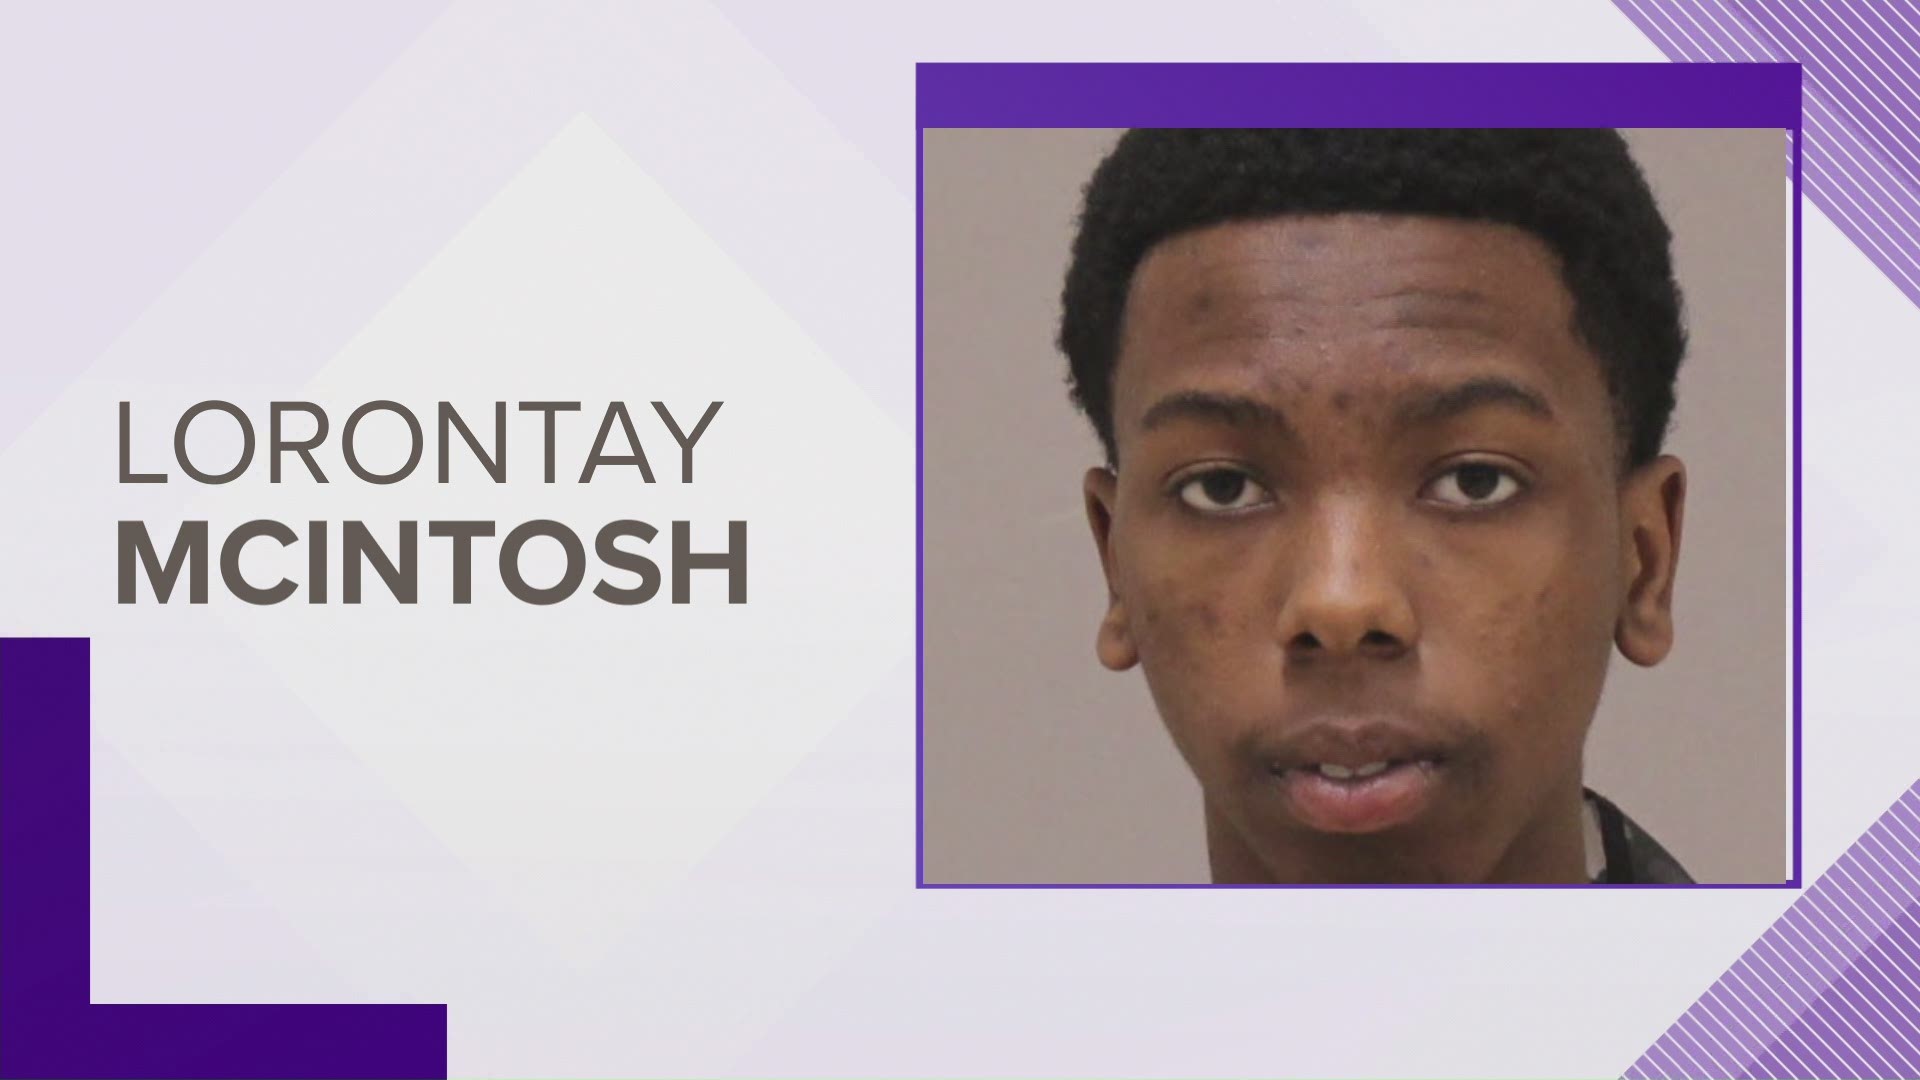 A 17-year-old with an extensive criminal past has been charged in an armed robbery last week at a Wyoming cellphone store.